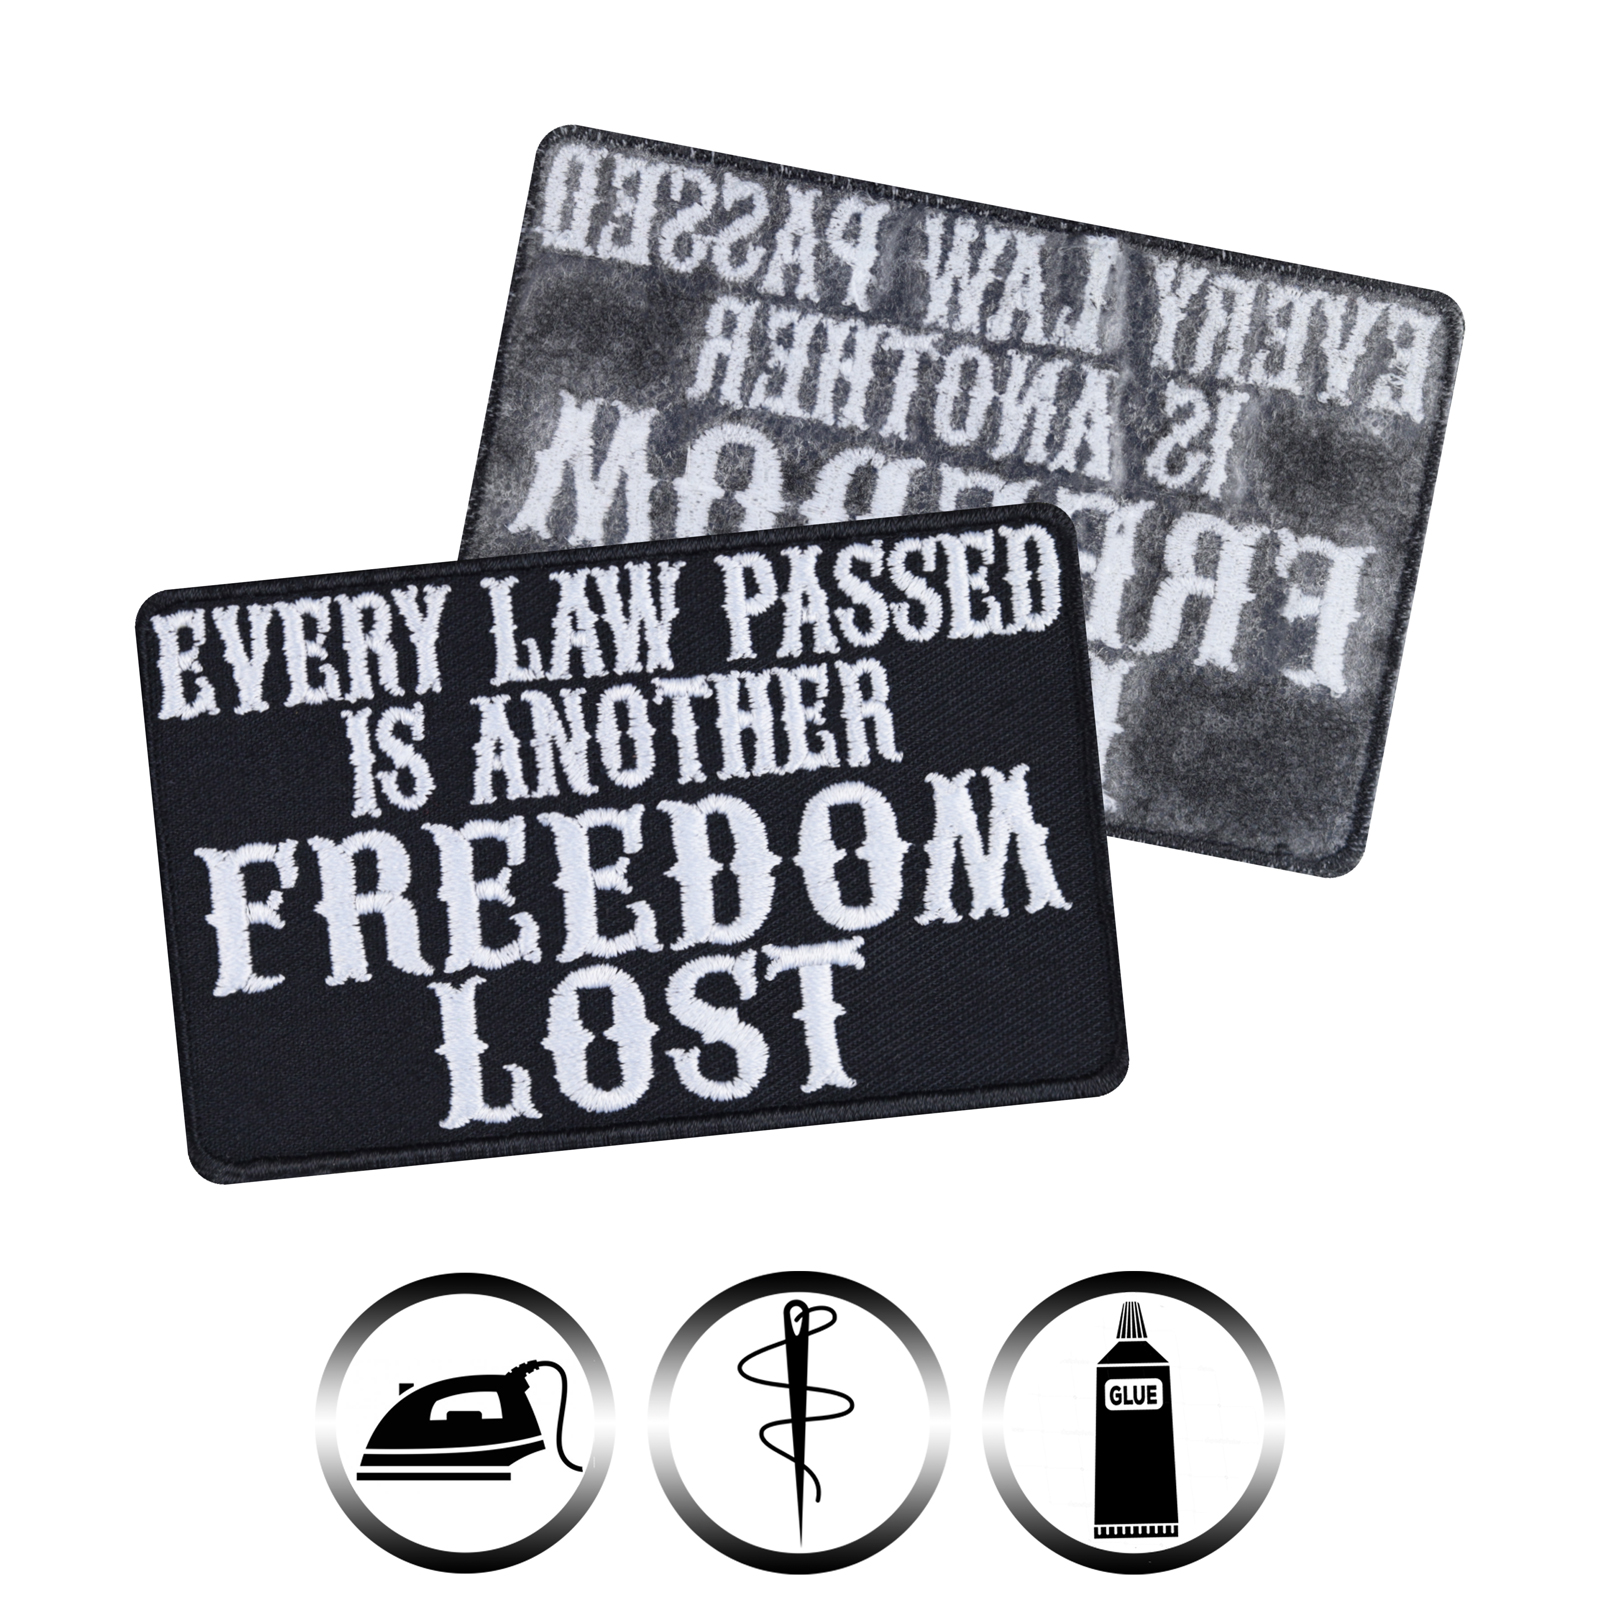 Every law passed is another freedom lost - Patch